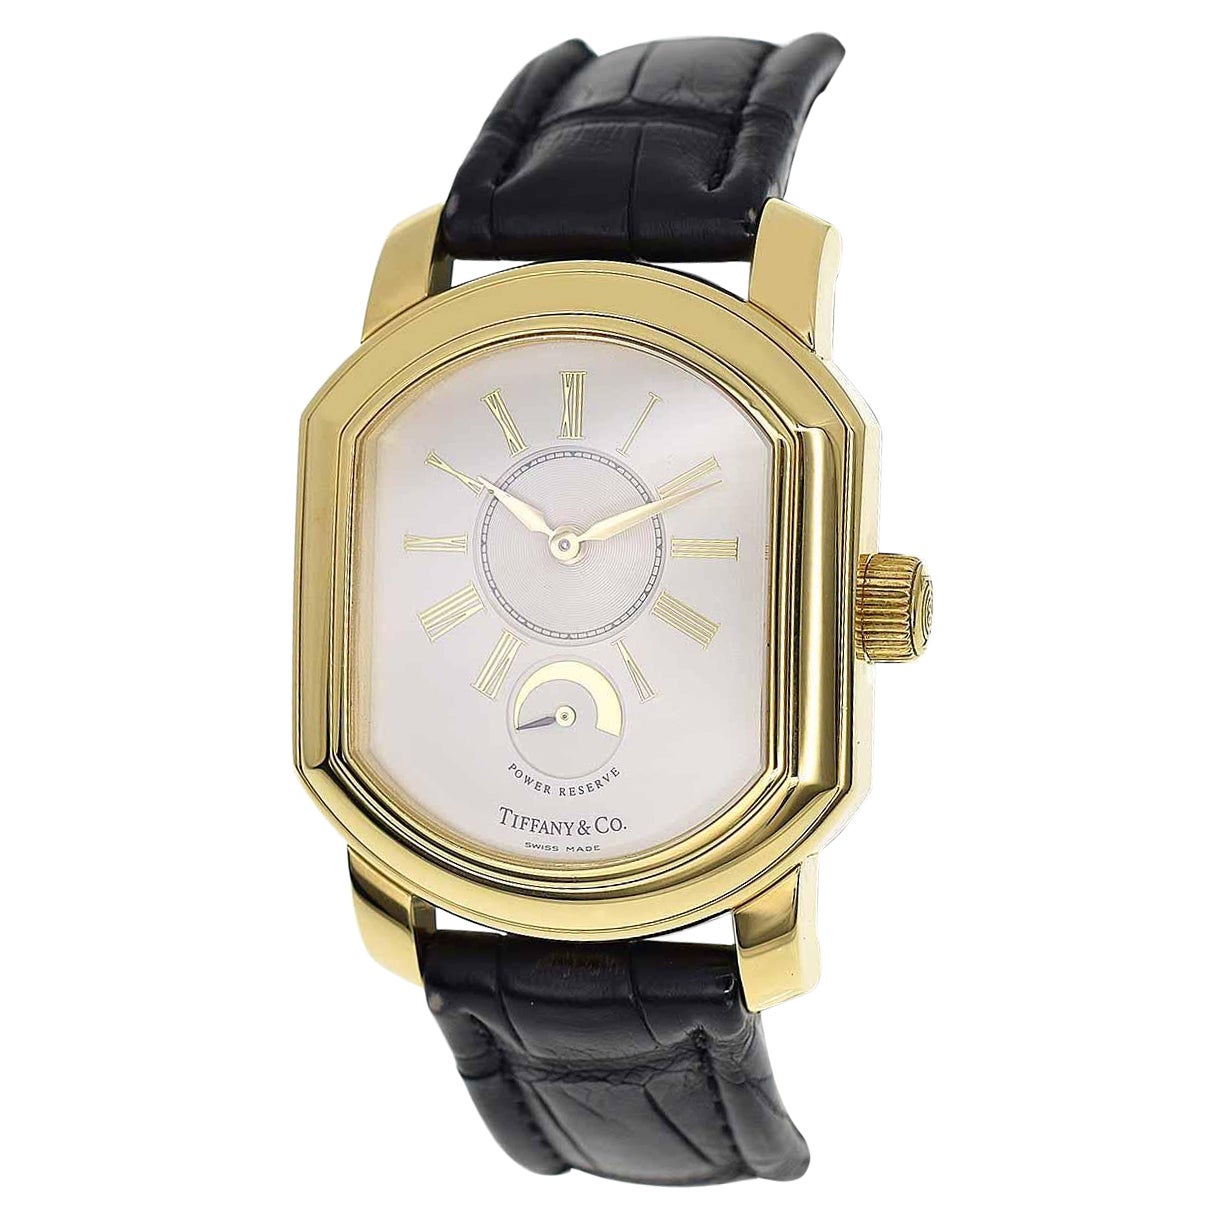 Tiffany & Co. 18 Karat Yellow Gold Black Leather Strap Mark Coupe Watch